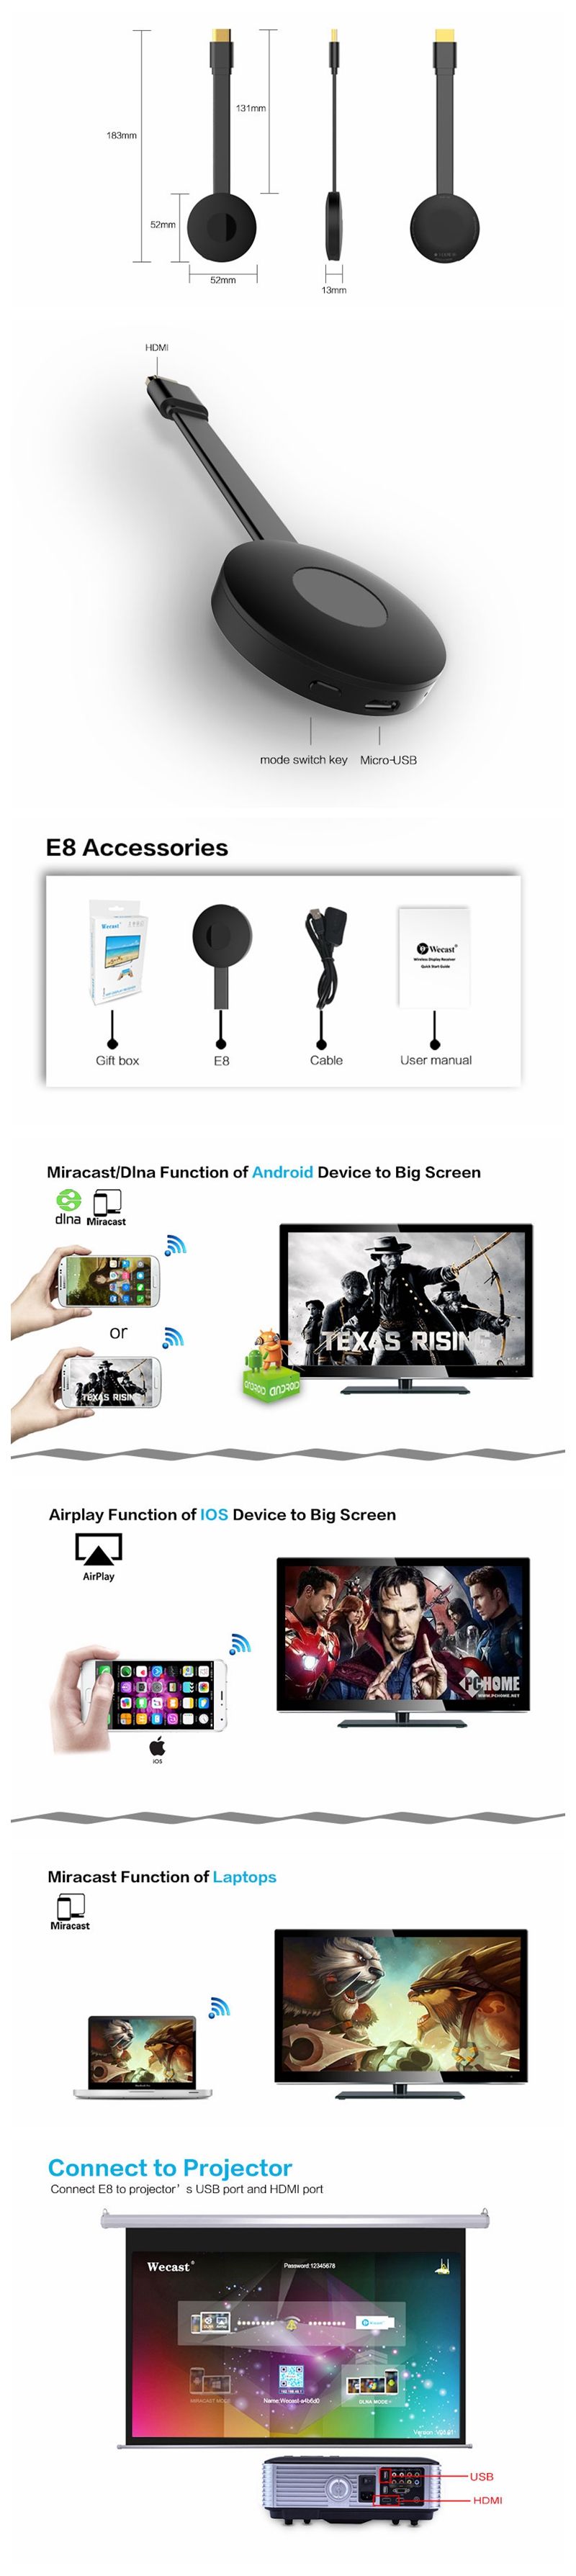 E6-4K-Screen-Projection-Miracast-HD-1080P-Wireless-WiFi-Display-Dongle-Cast-TV-Dongle-24G5G-For-Proj-1662780